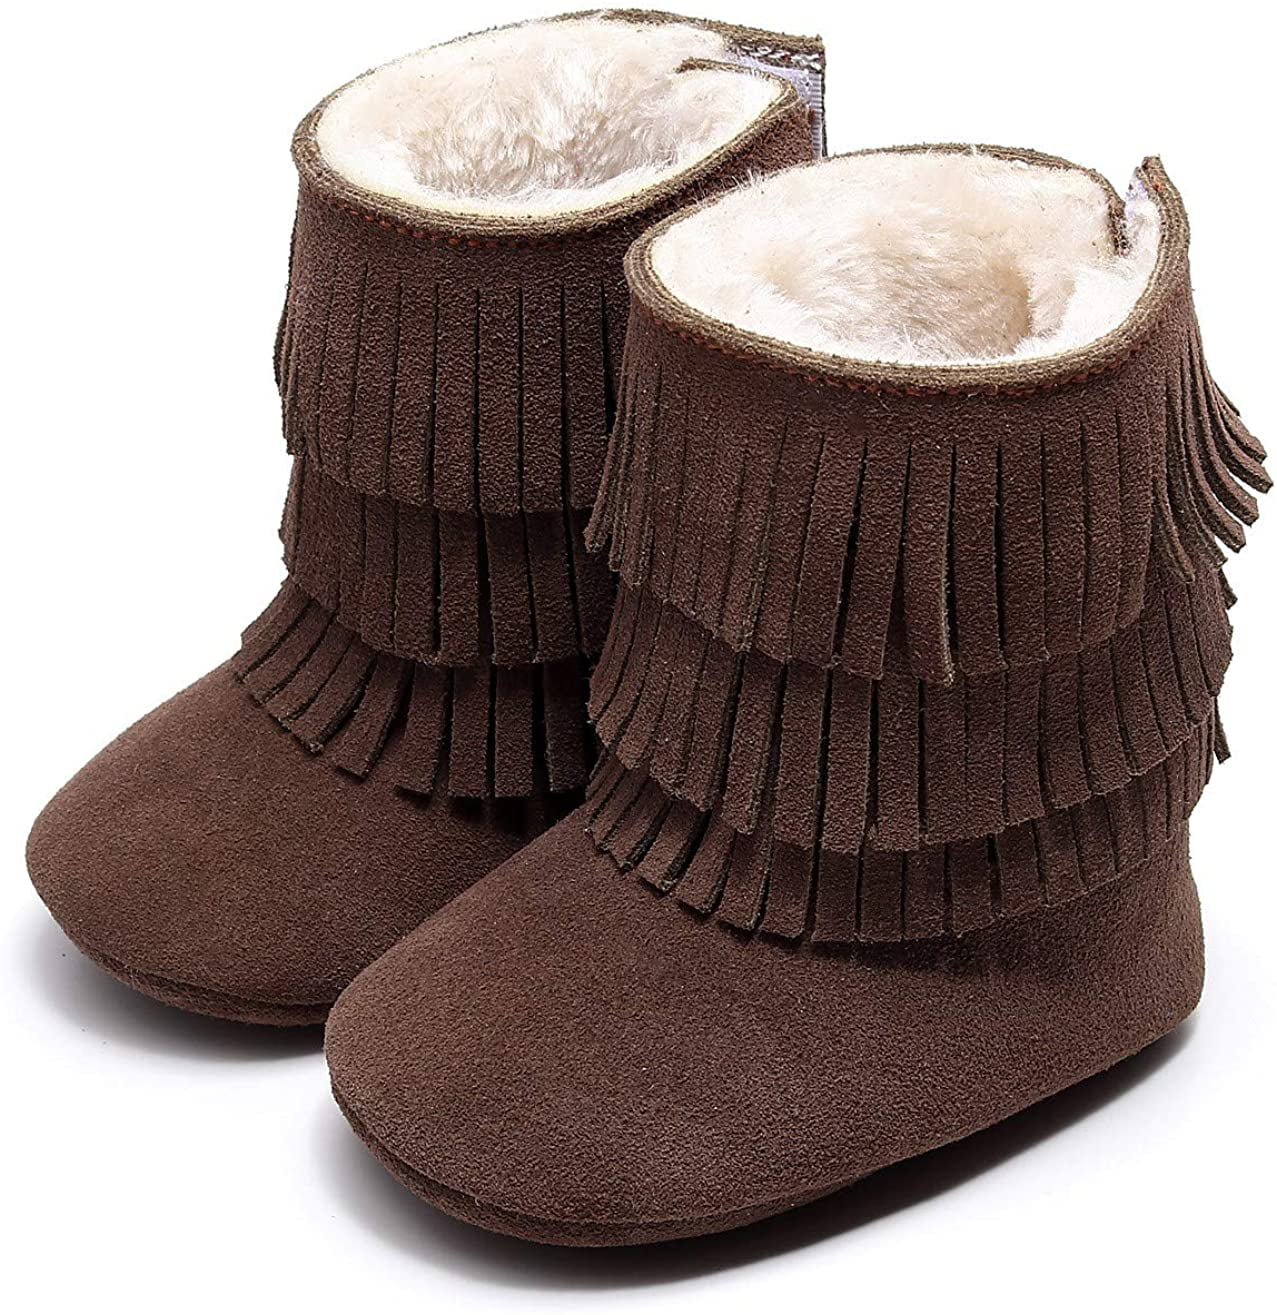 HONGTEYA Real Leather Fringe Baby Booties for Girls Boys Winter Warm Snow Boots with Tassels Soft Sole Fur LinedToddler Moccasins Shoes